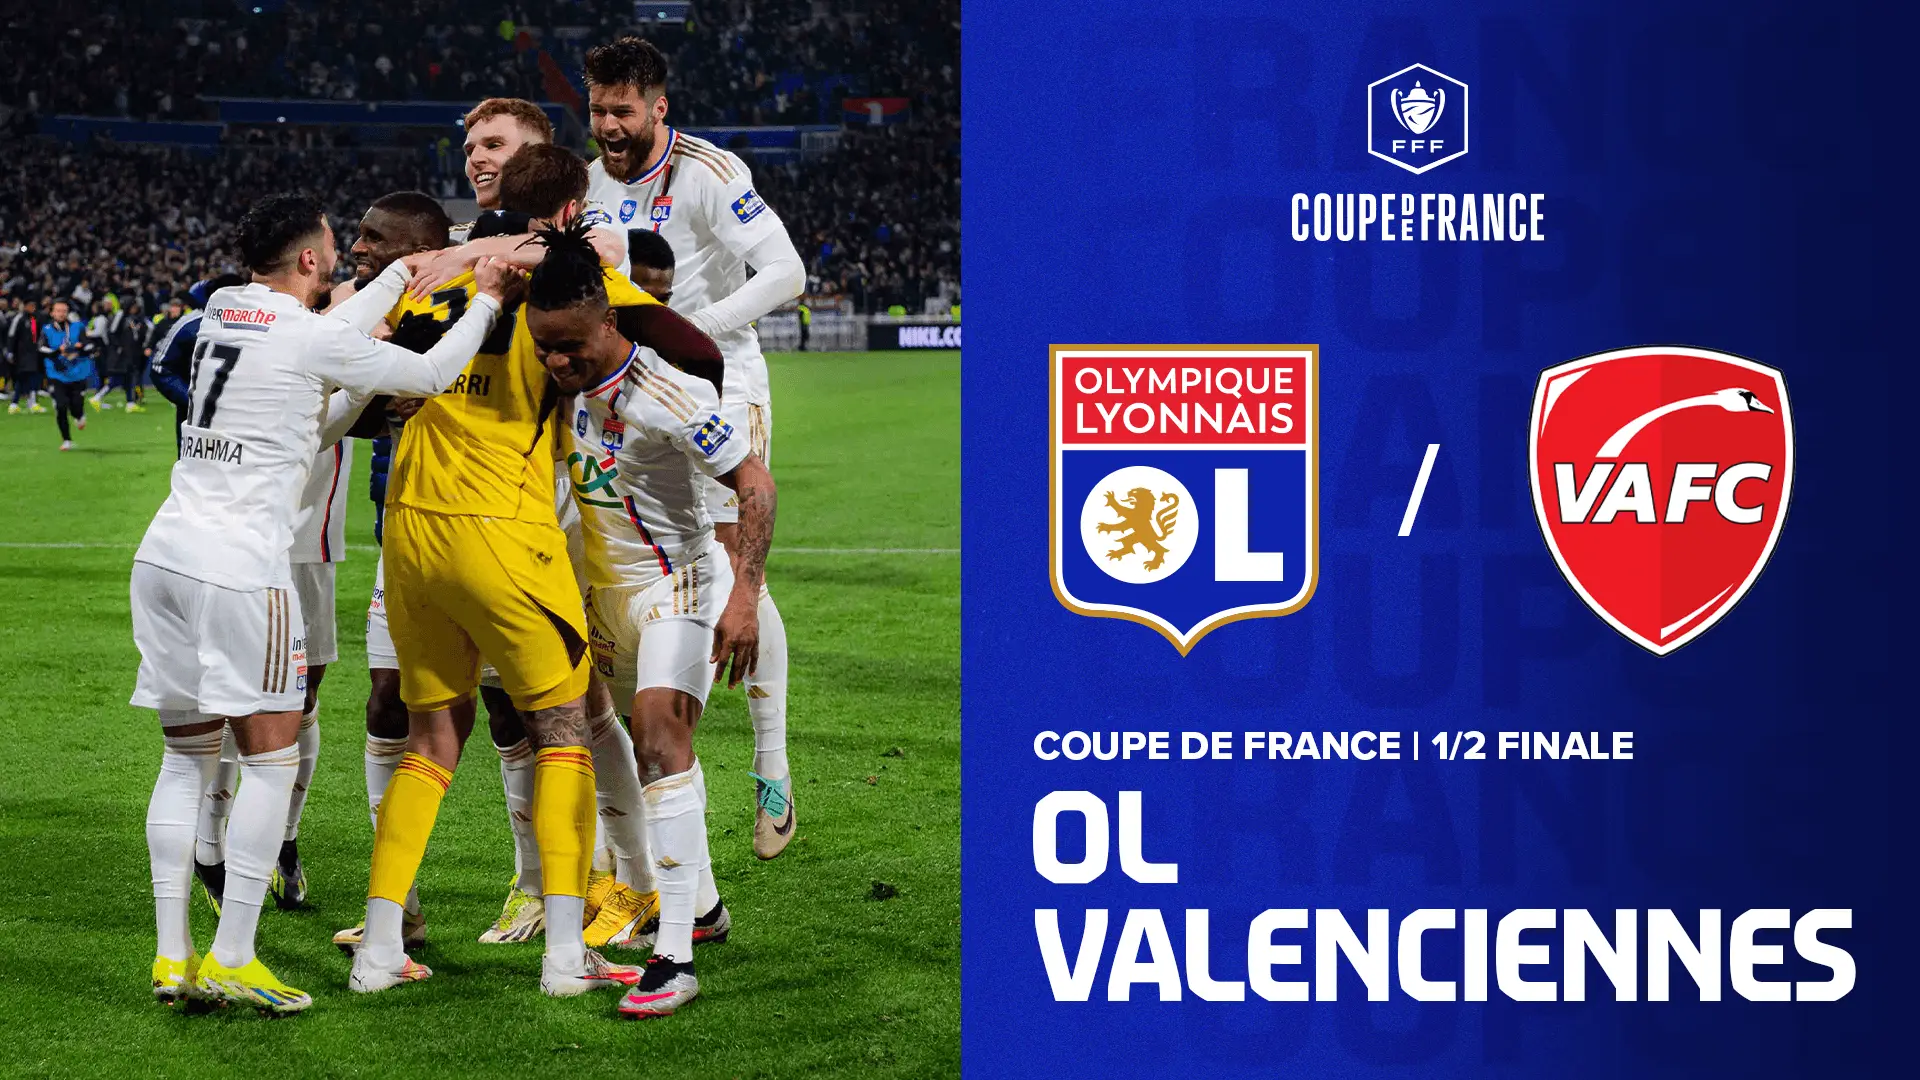 Olympique Lyonnais - Valenciennes Match Live: Schedule, Television Broadcast and Streaming - Media7